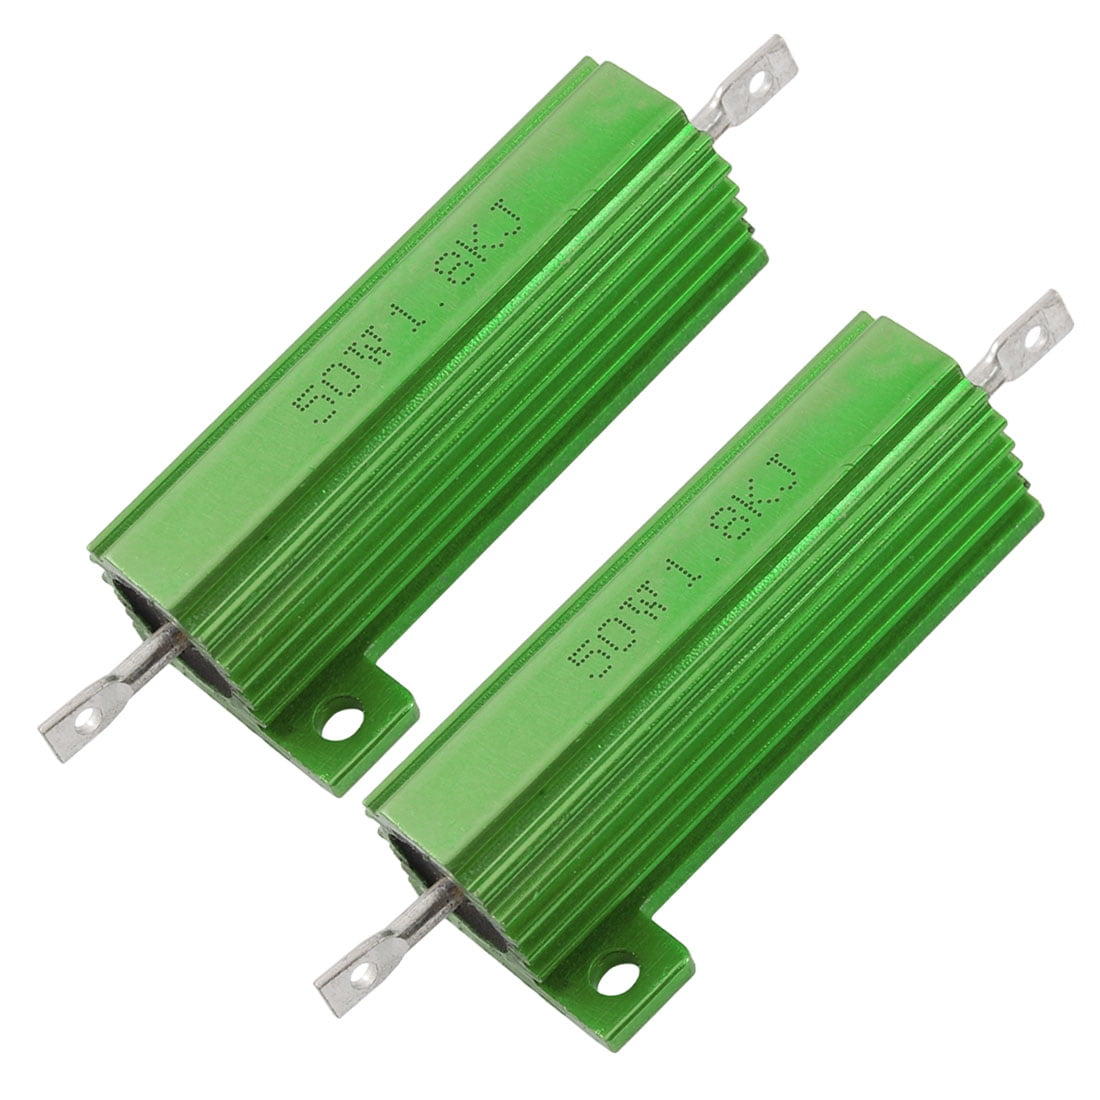 uxcell 50W 100 Ohm 5% Aluminum Housing Resistor Screw Tap Chassis Mounted Aluminum Case Wirewound Resistor Load Resistors Green 2 pcs 